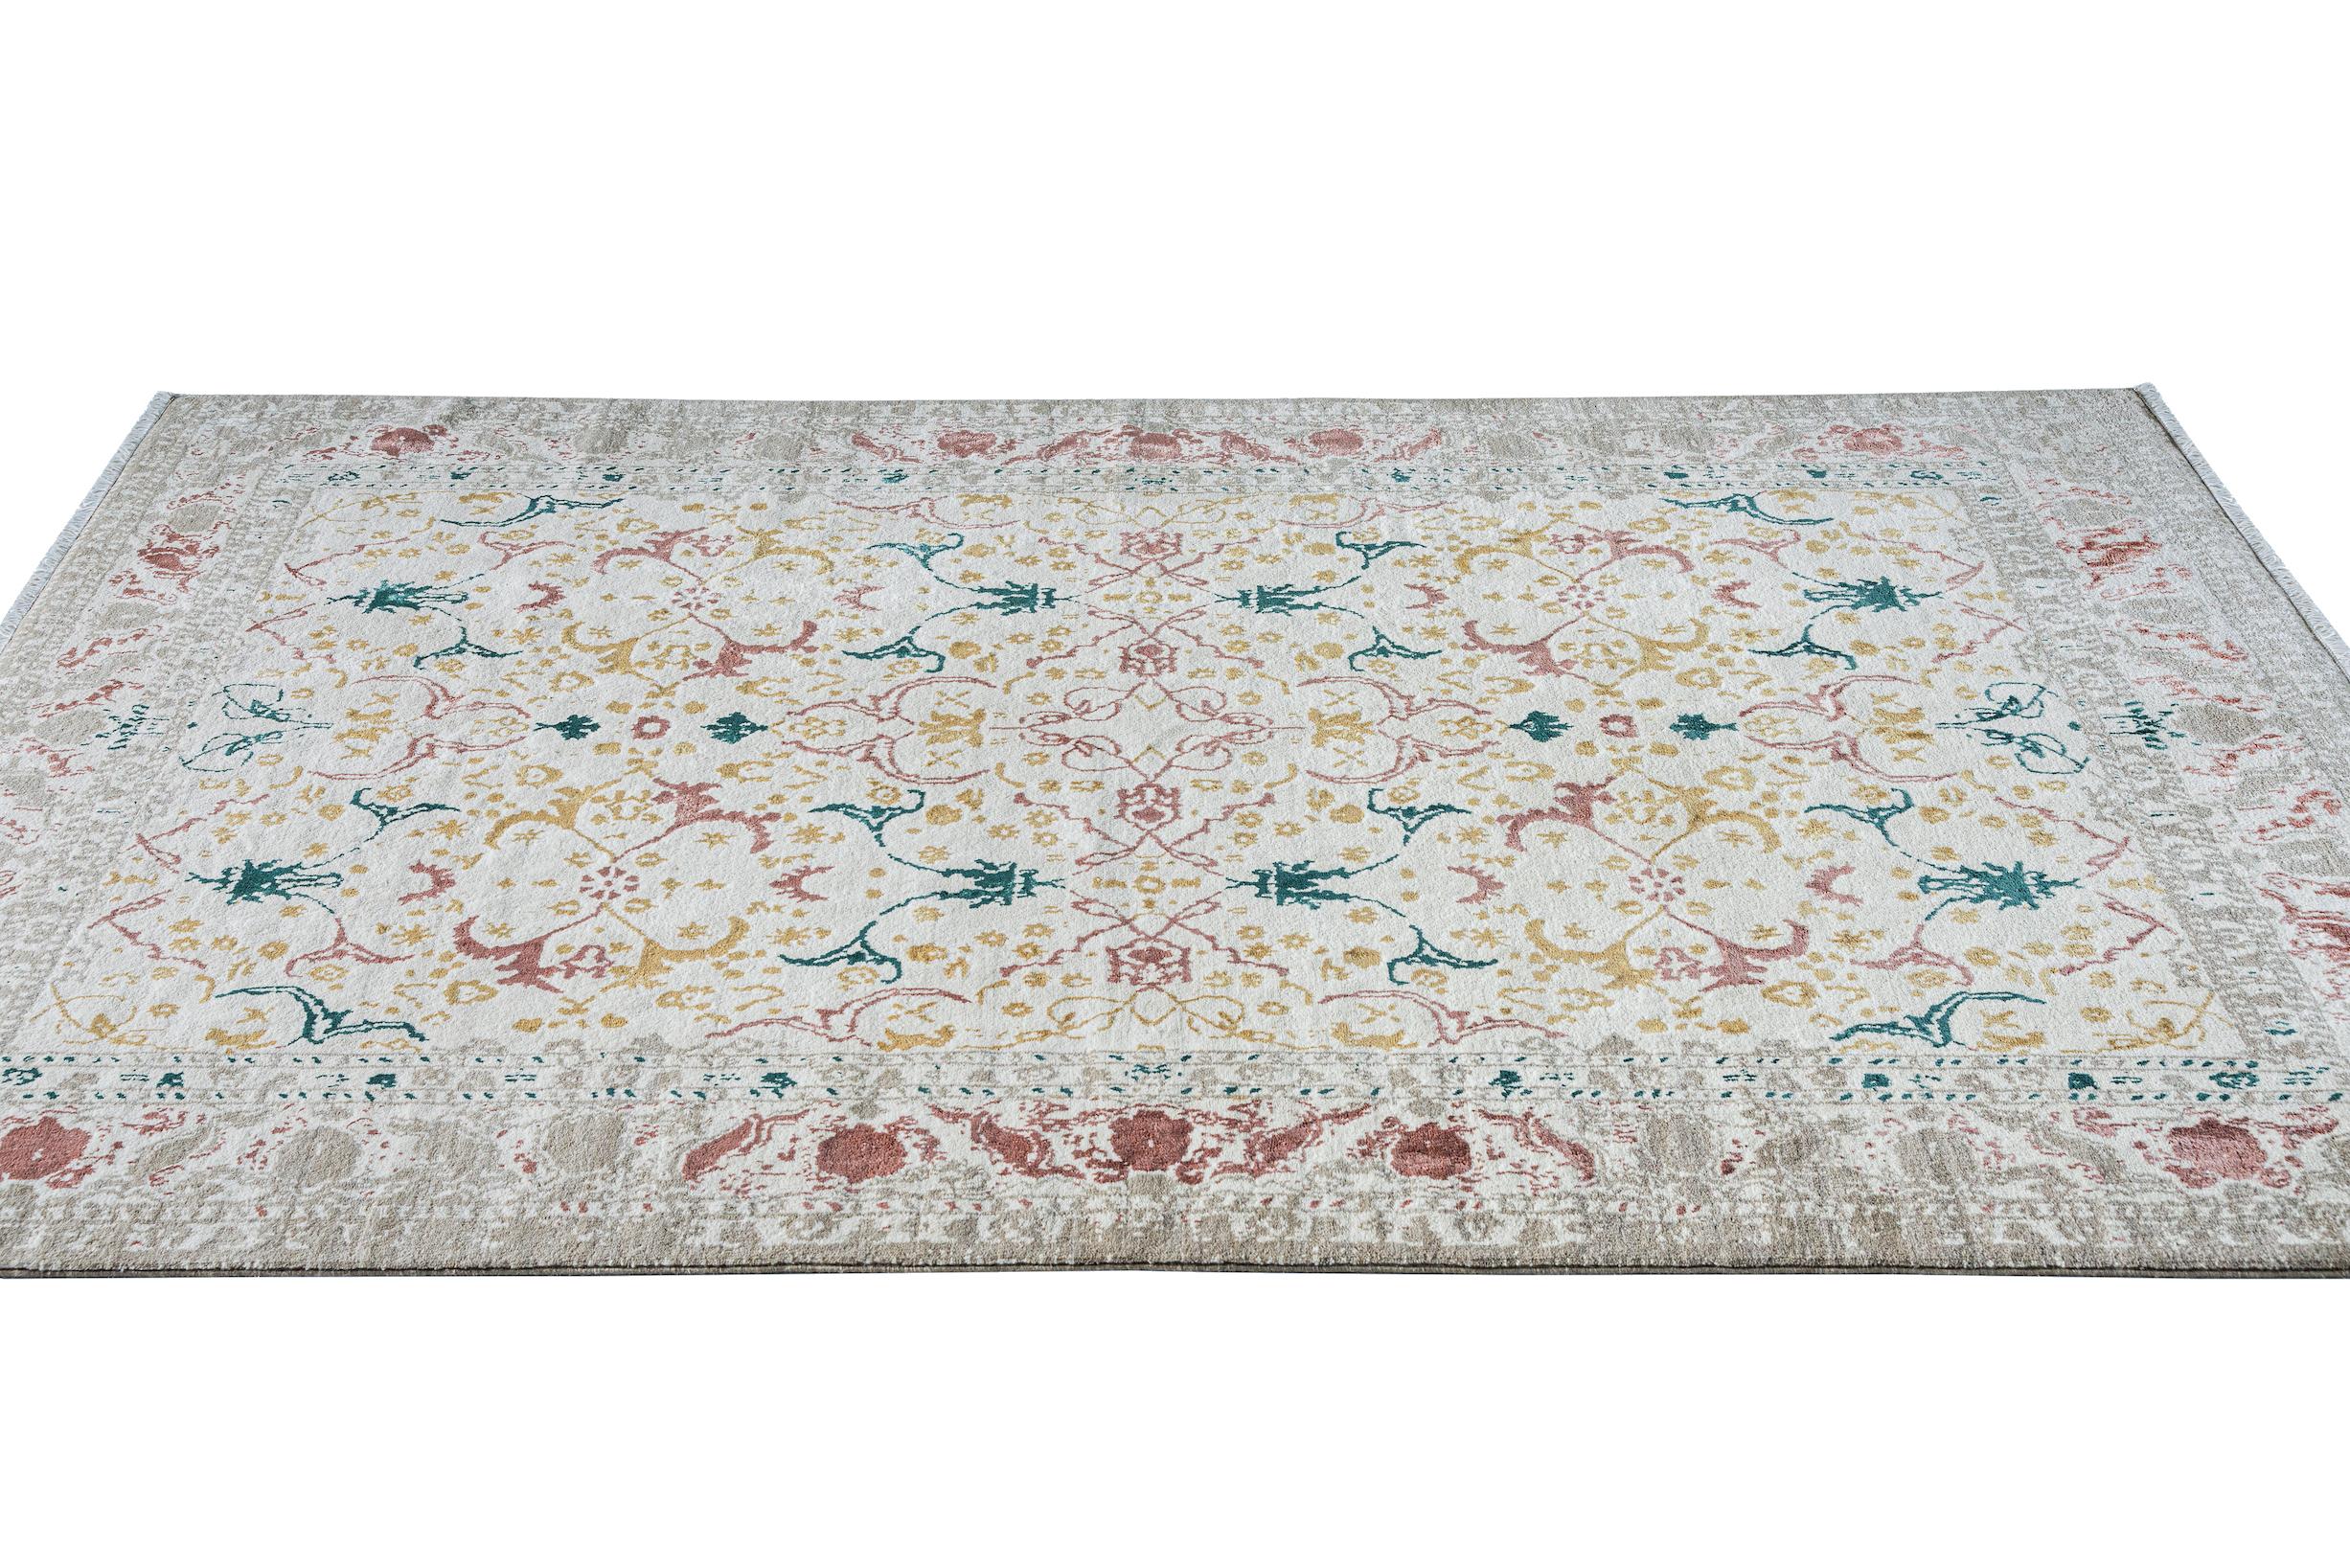 Neoclassical Revival Kahhal Looms Tabriz Spectrum Hand-Knotted 350x250cm Rug For Sale